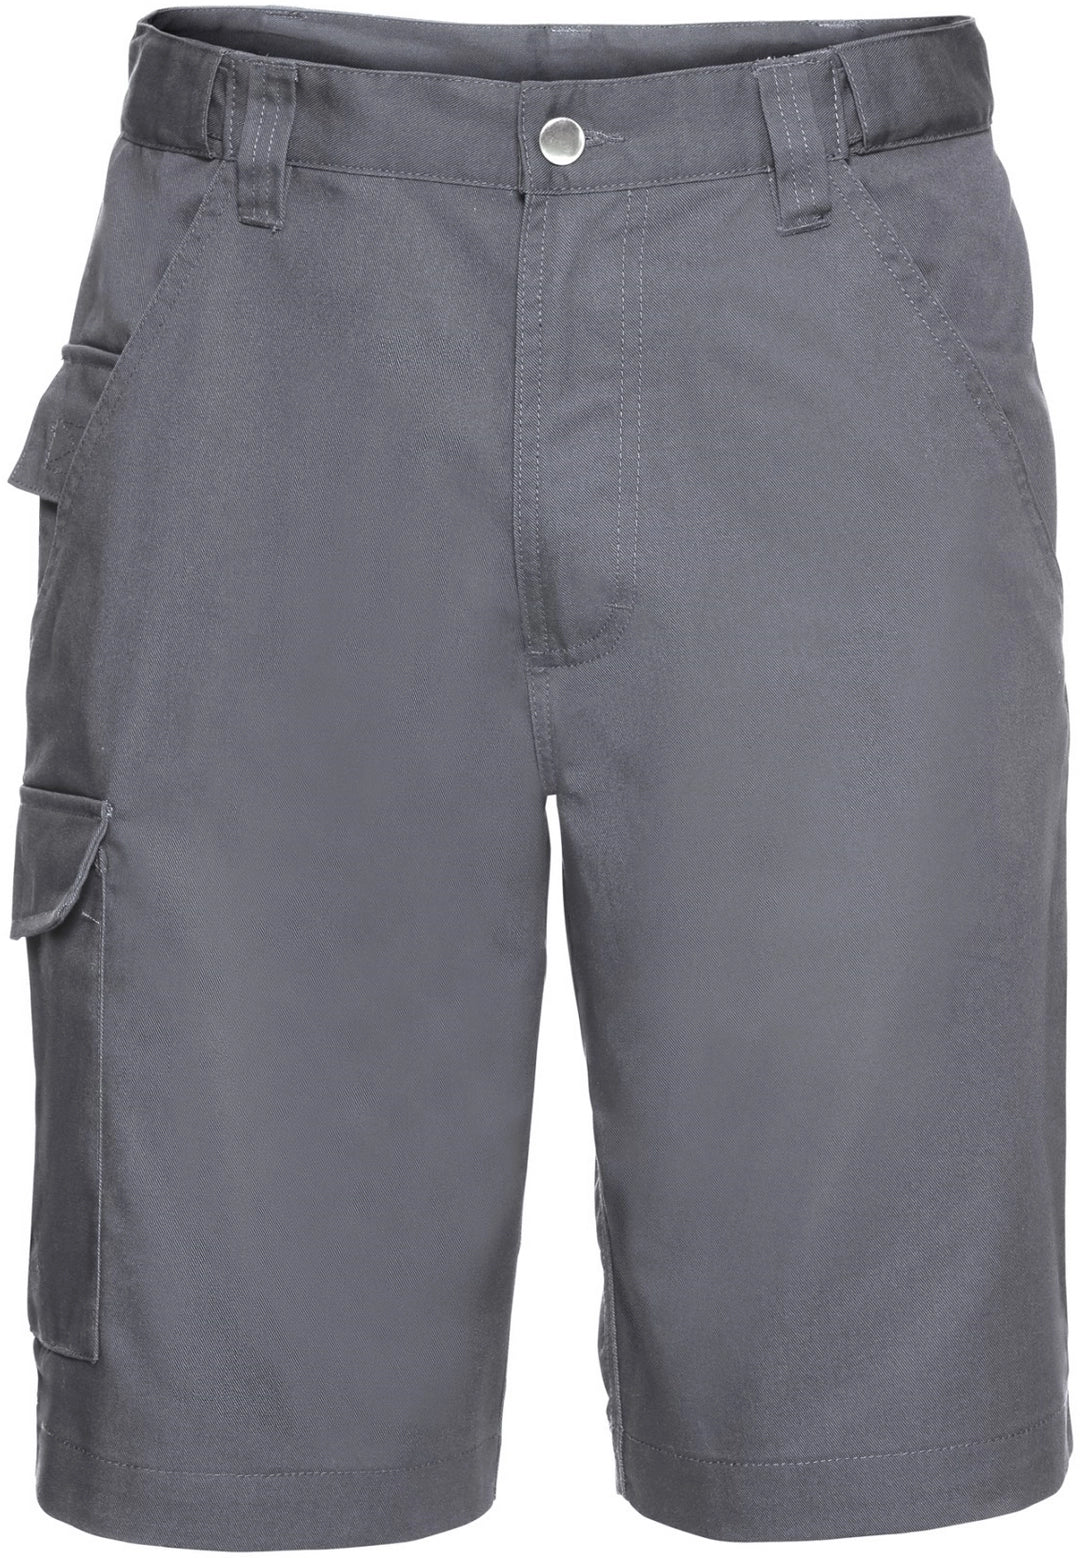 Russell 002M Adult Twill Poycotton Work Shorts - COOZO